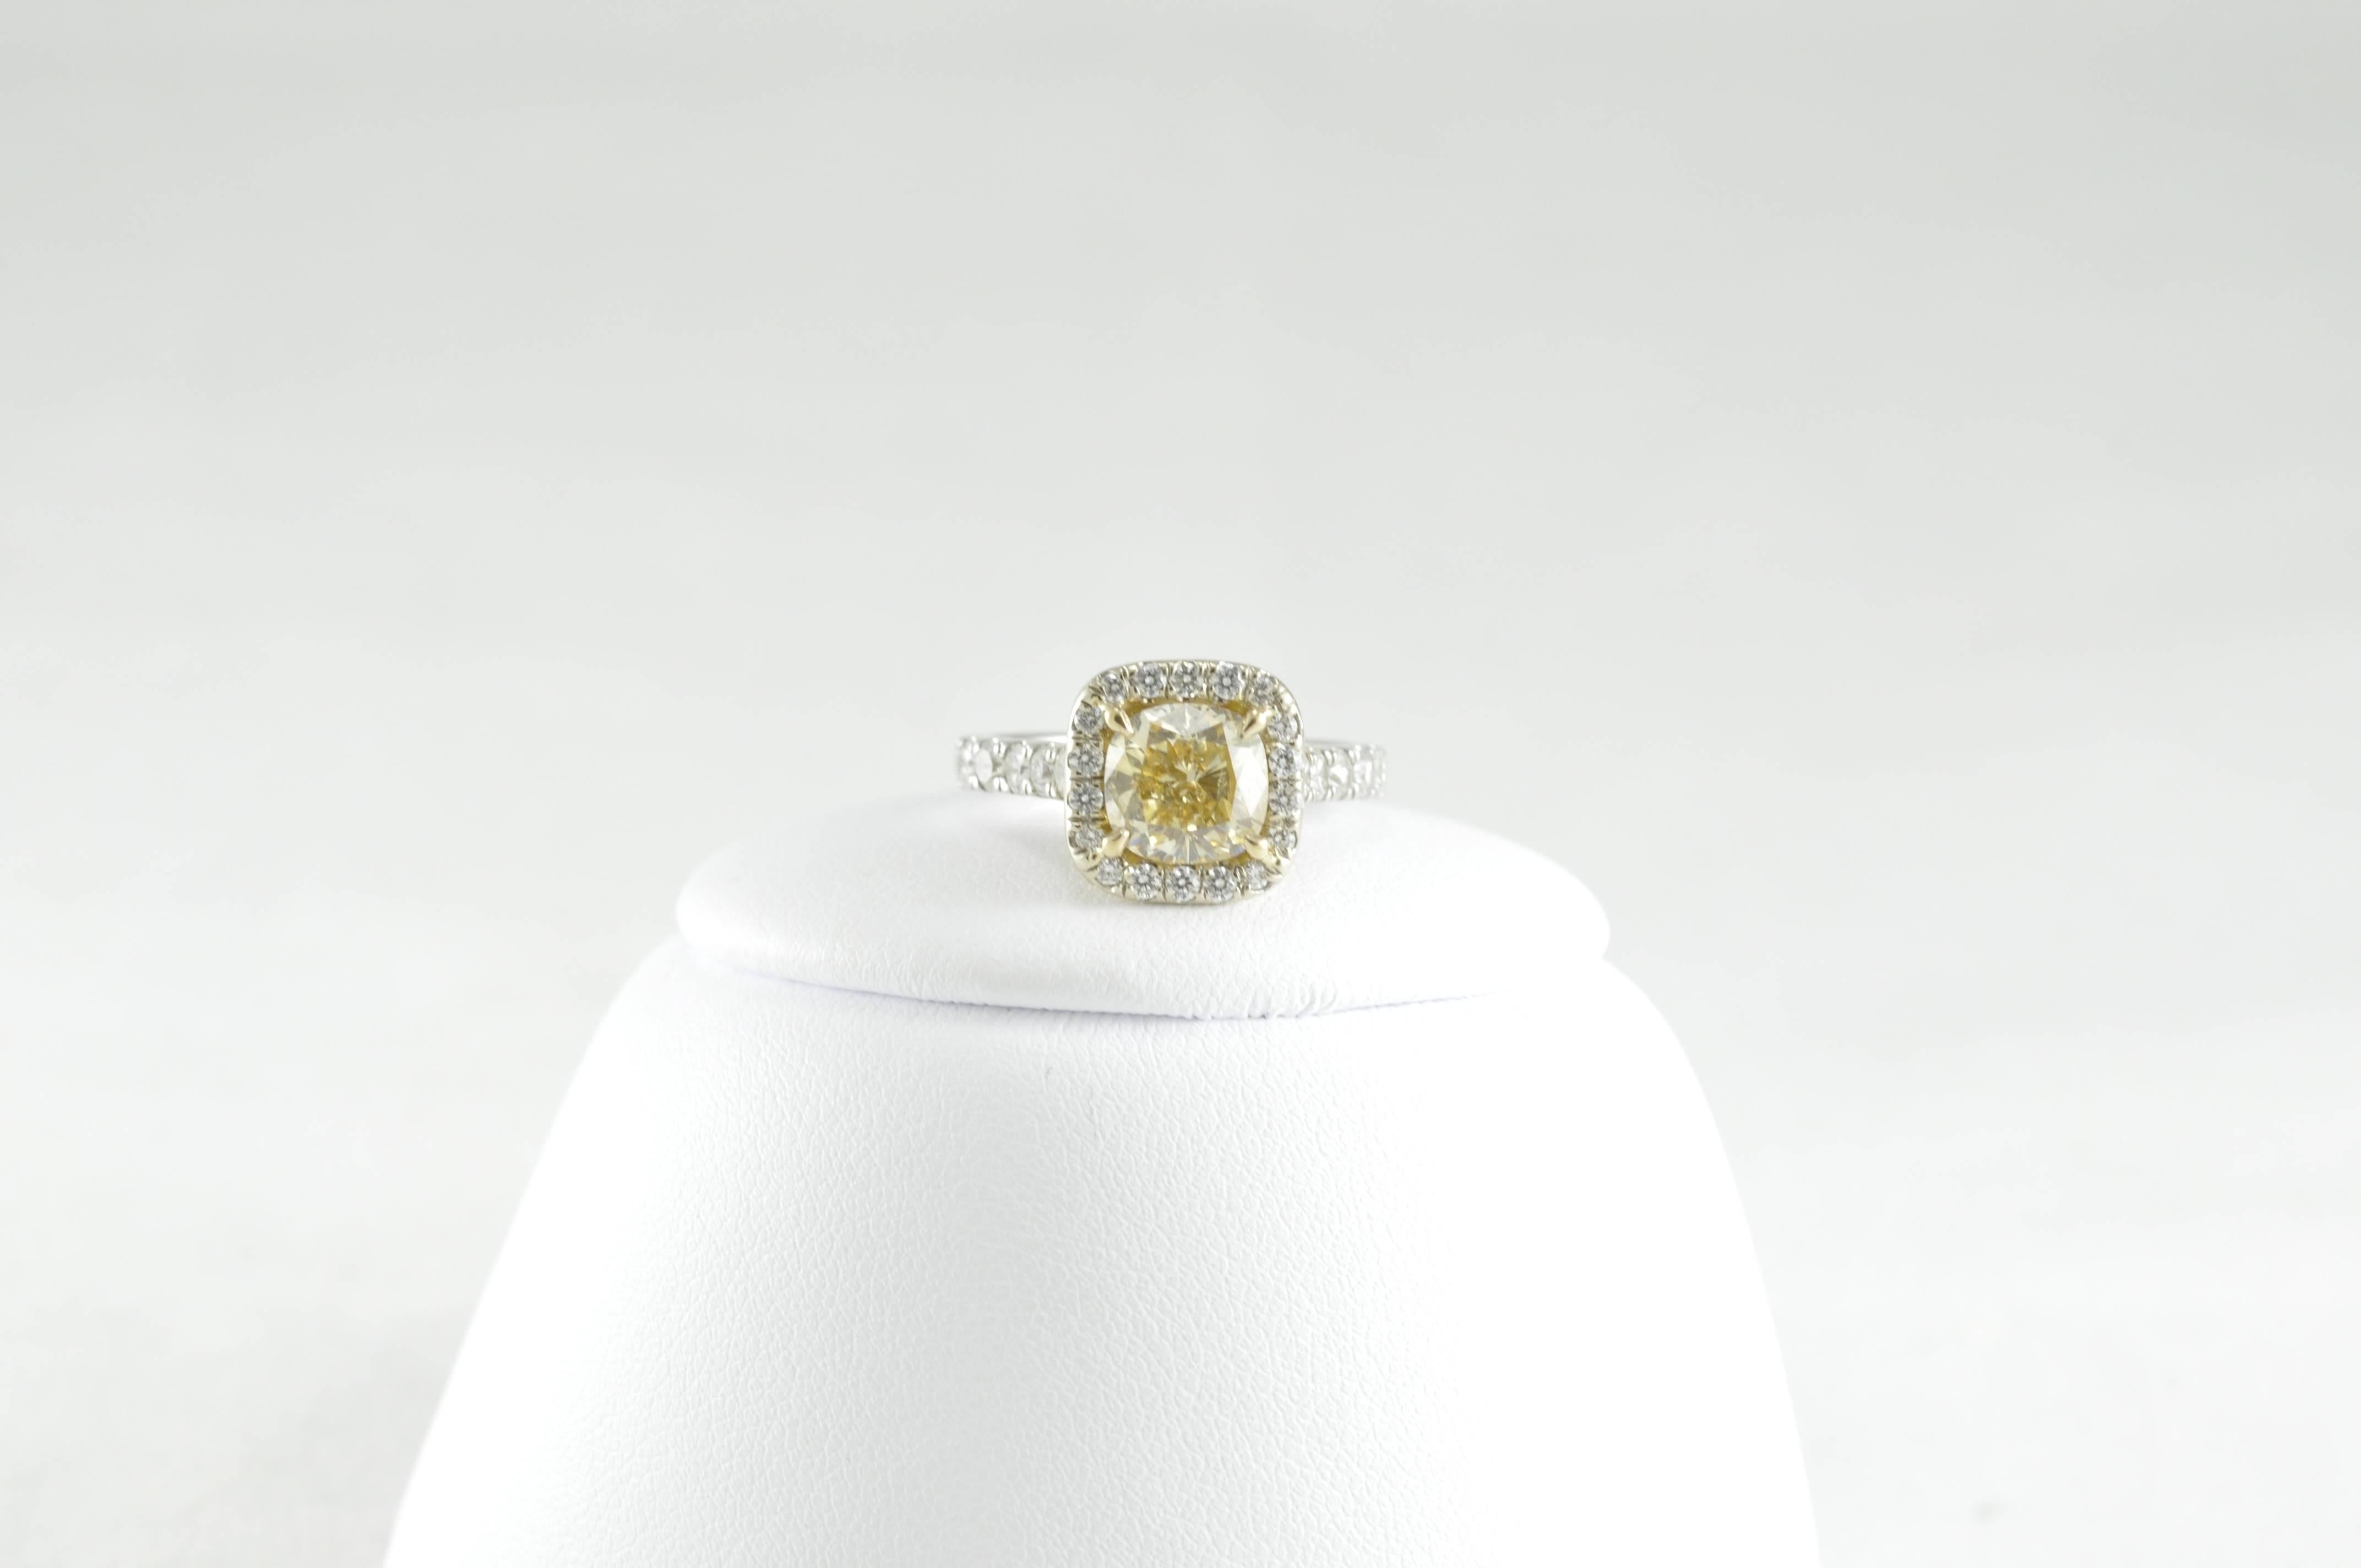 14k White Gold with 2.01ct Yellow Cushion-cut Diamond surrounded by 1.25ct of Round White Diamond Engagement Ring. The center stone measures 7mm x 7mm. The piece is currently a size 4.75 but could be sized.
Absolutely stunning! Not one that you'll